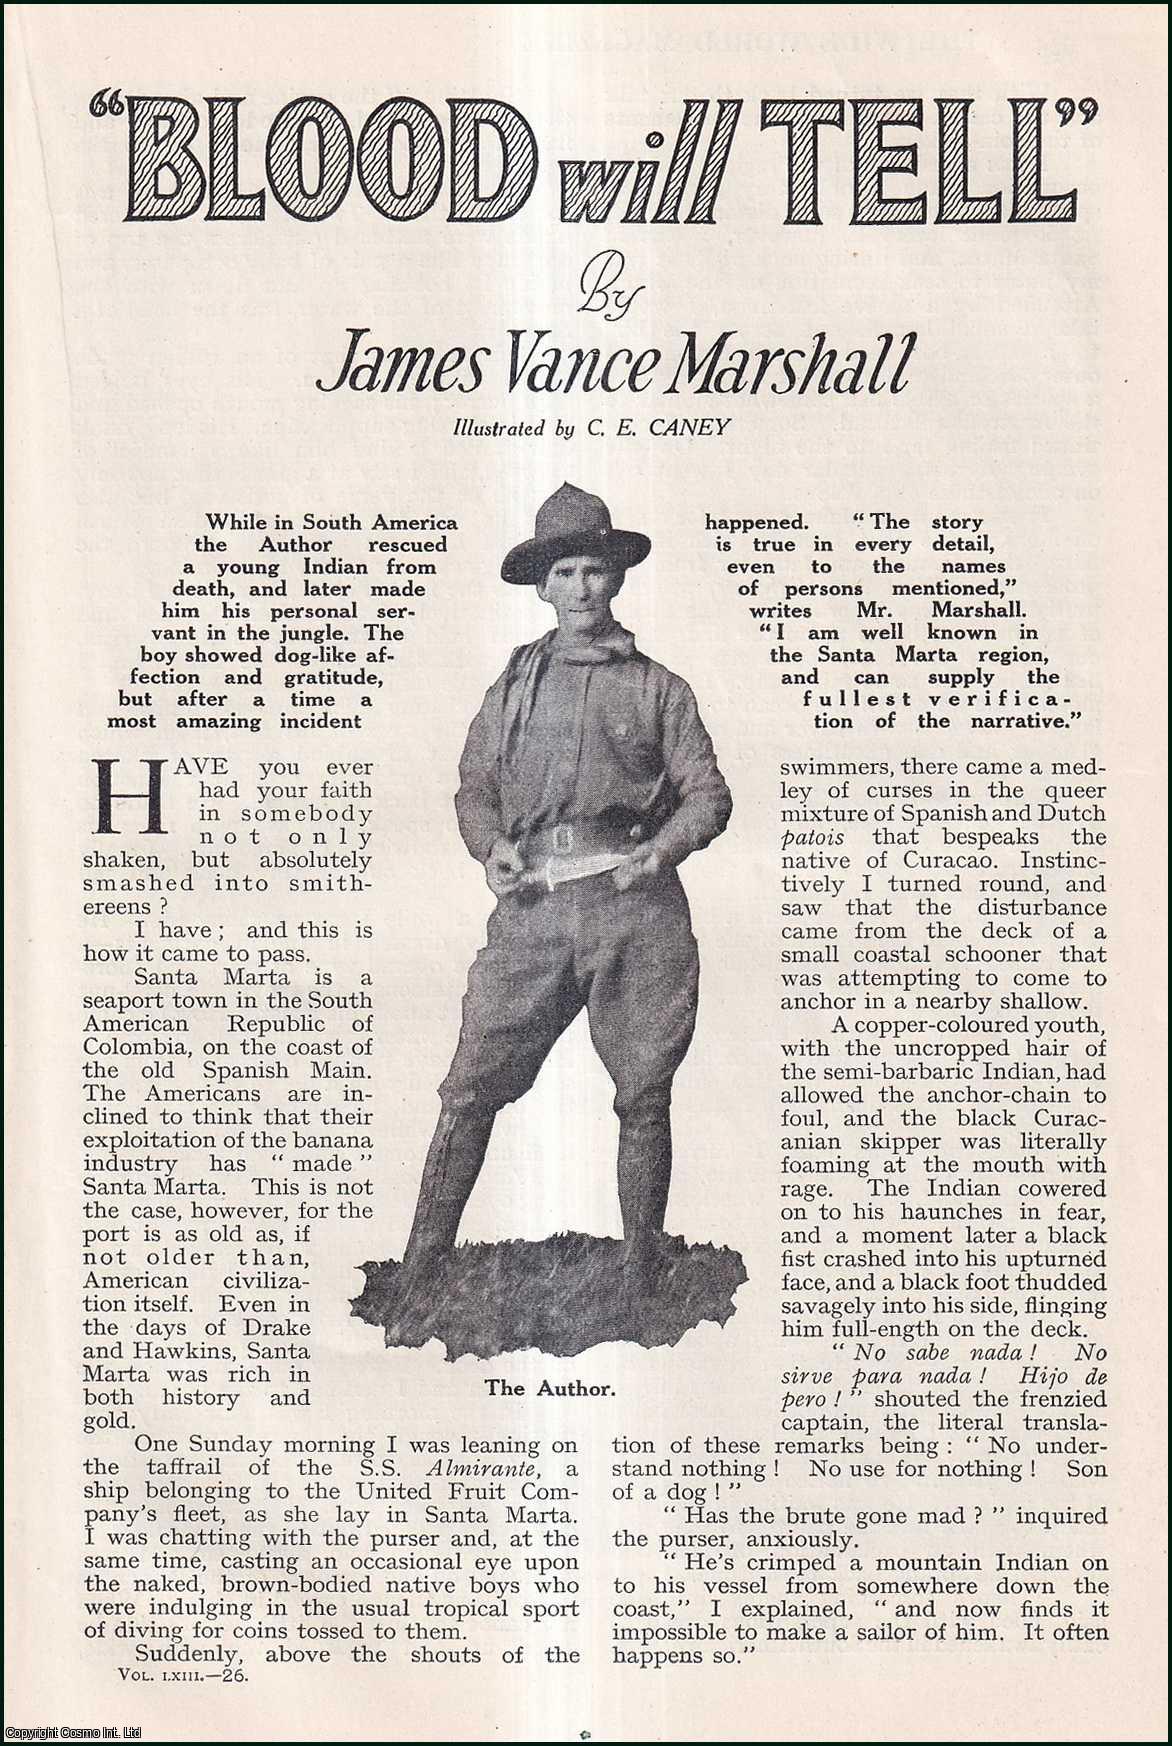 James Vance Marshall. Illustrated by C.E. Caney. - Blood will Tell : while in South America the author rescued a young Indian from death, & later made him his personal servant in the jungle. An uncommon original article from the Wide World Magazine, 1929.